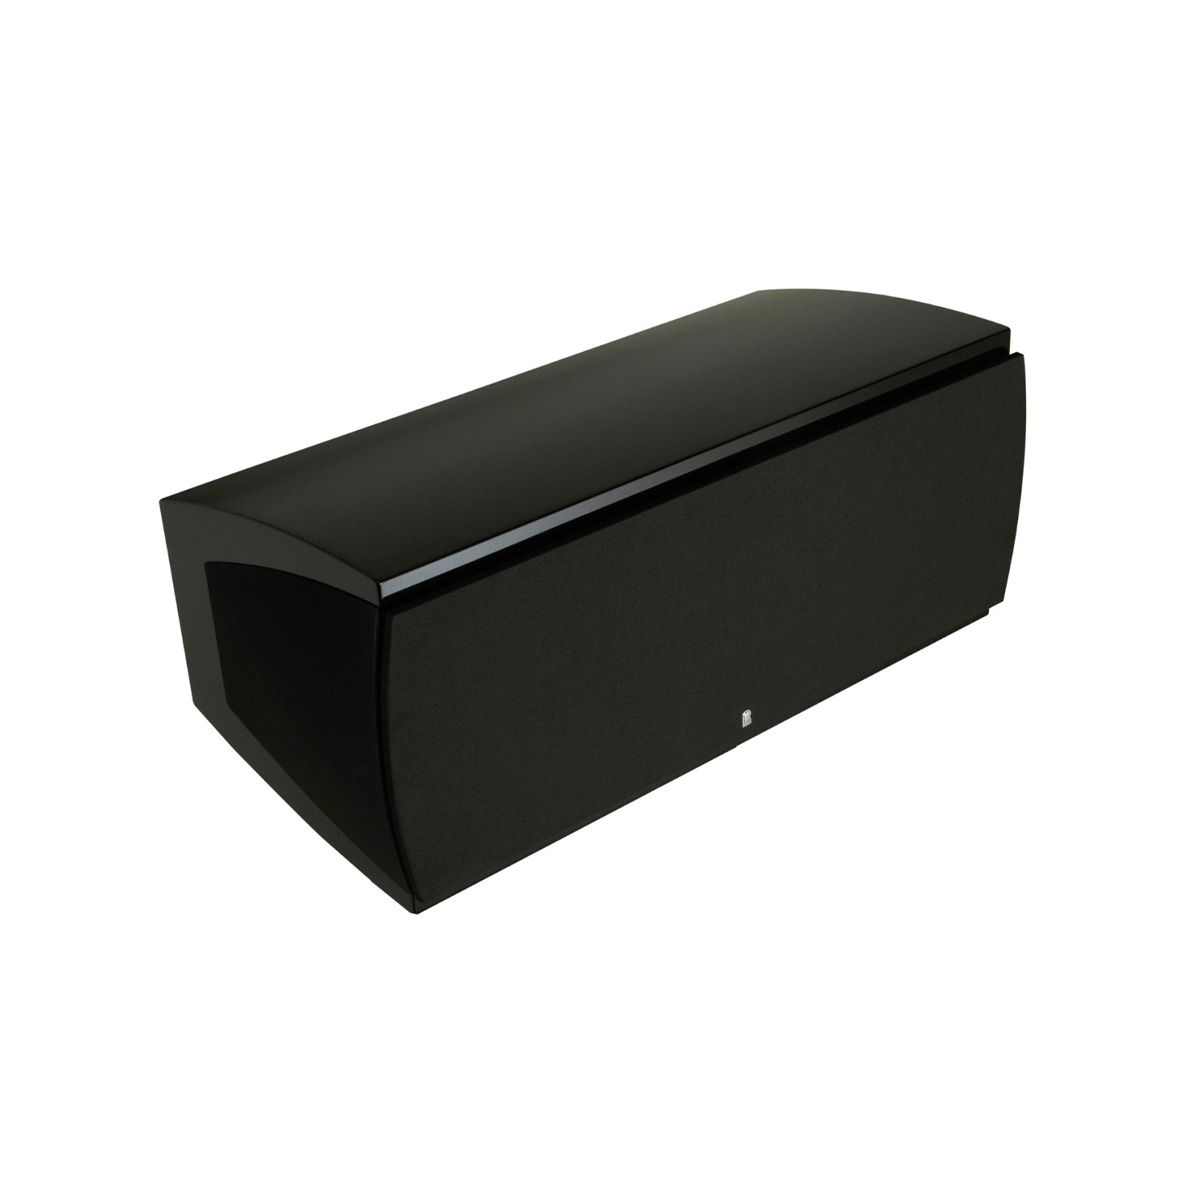 Revel C208 3-way Center Channel Loudspeaker - Black with grille - angled front view